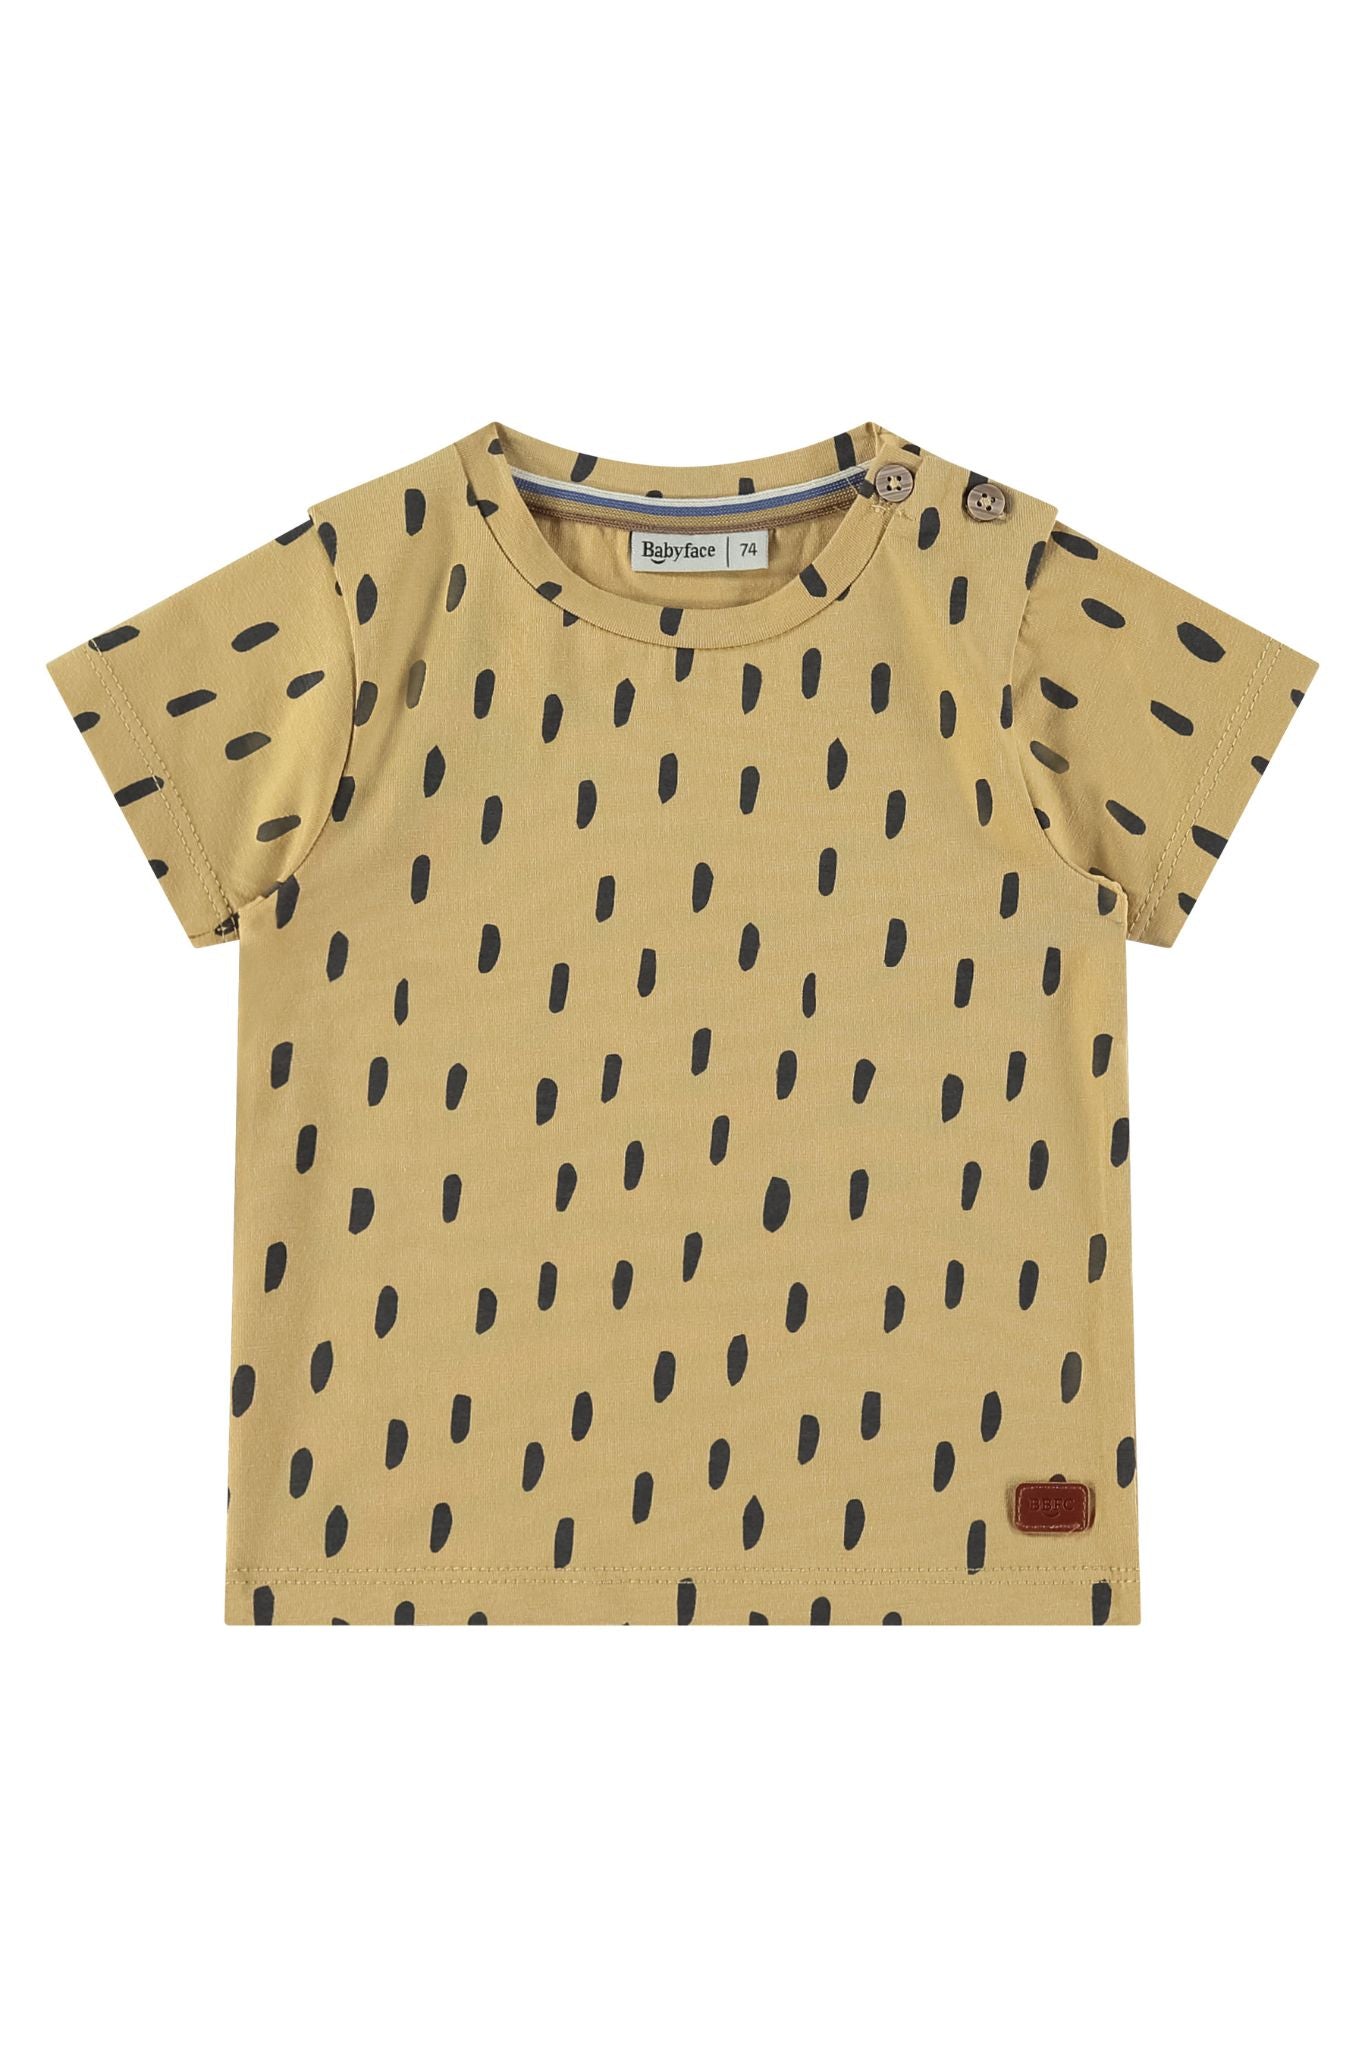 Baby Face Ochre Dotted Tshirt